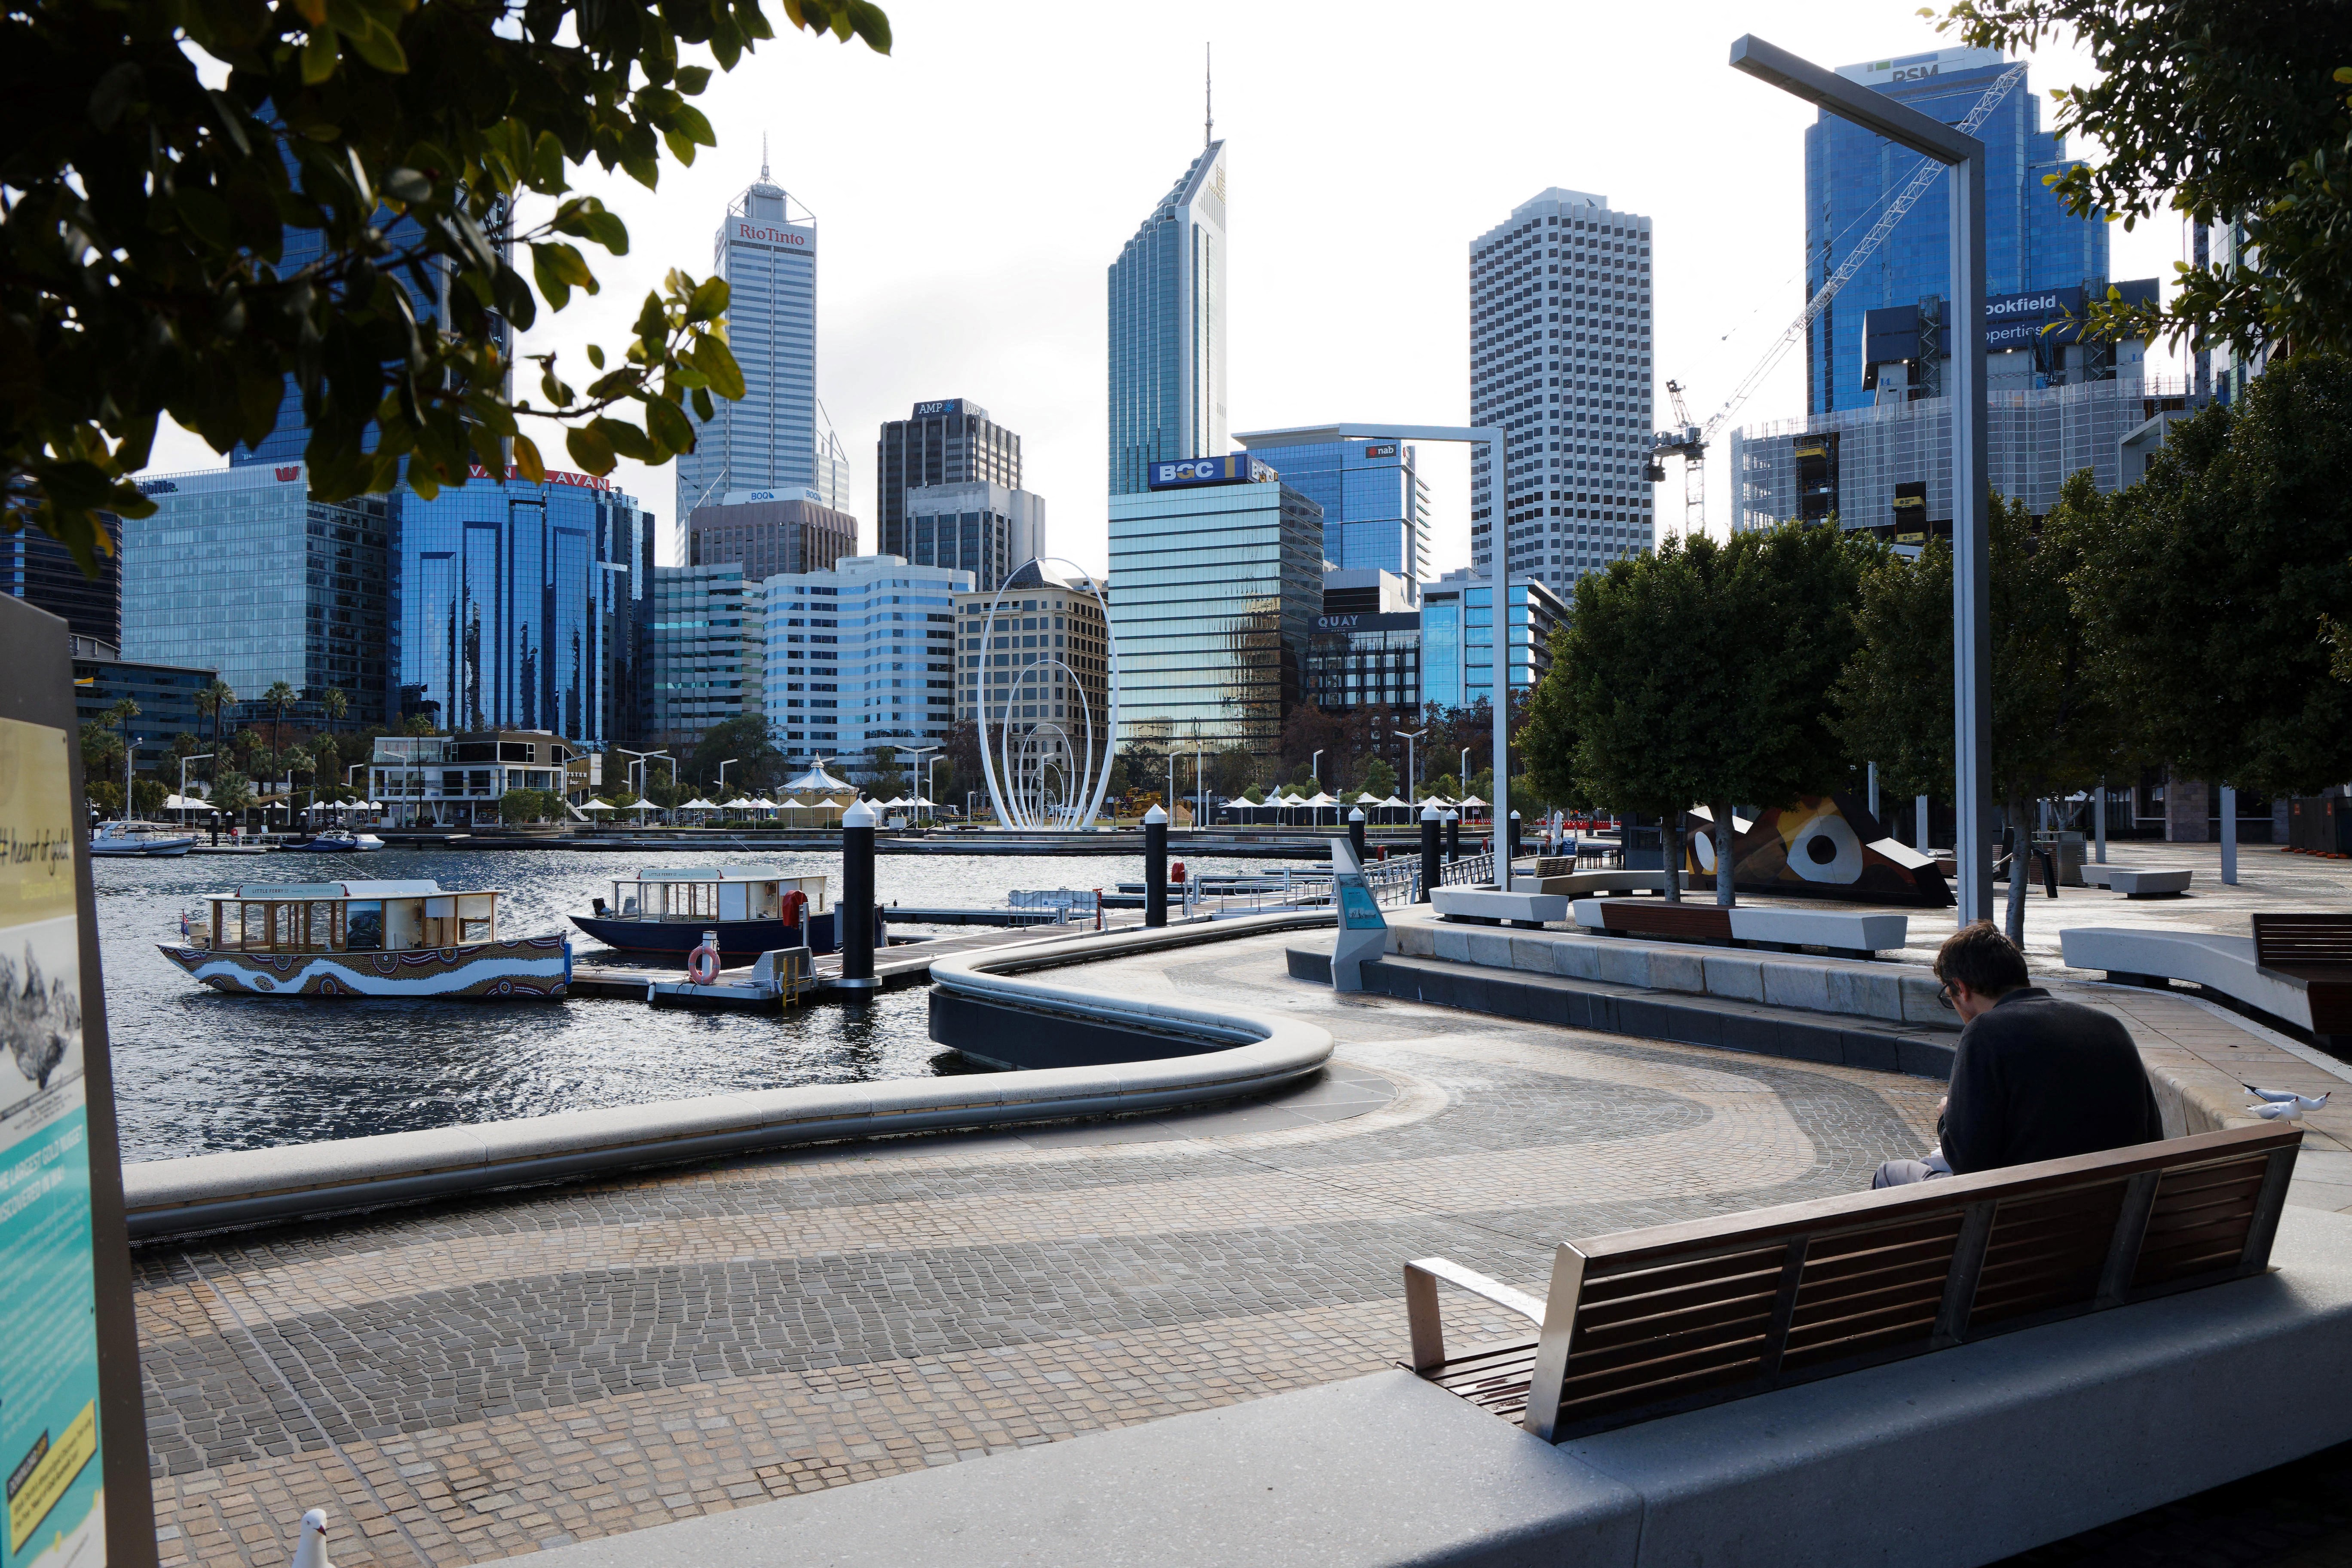 36 hours in Perth: 7 fun things to do for a Perth-ect time